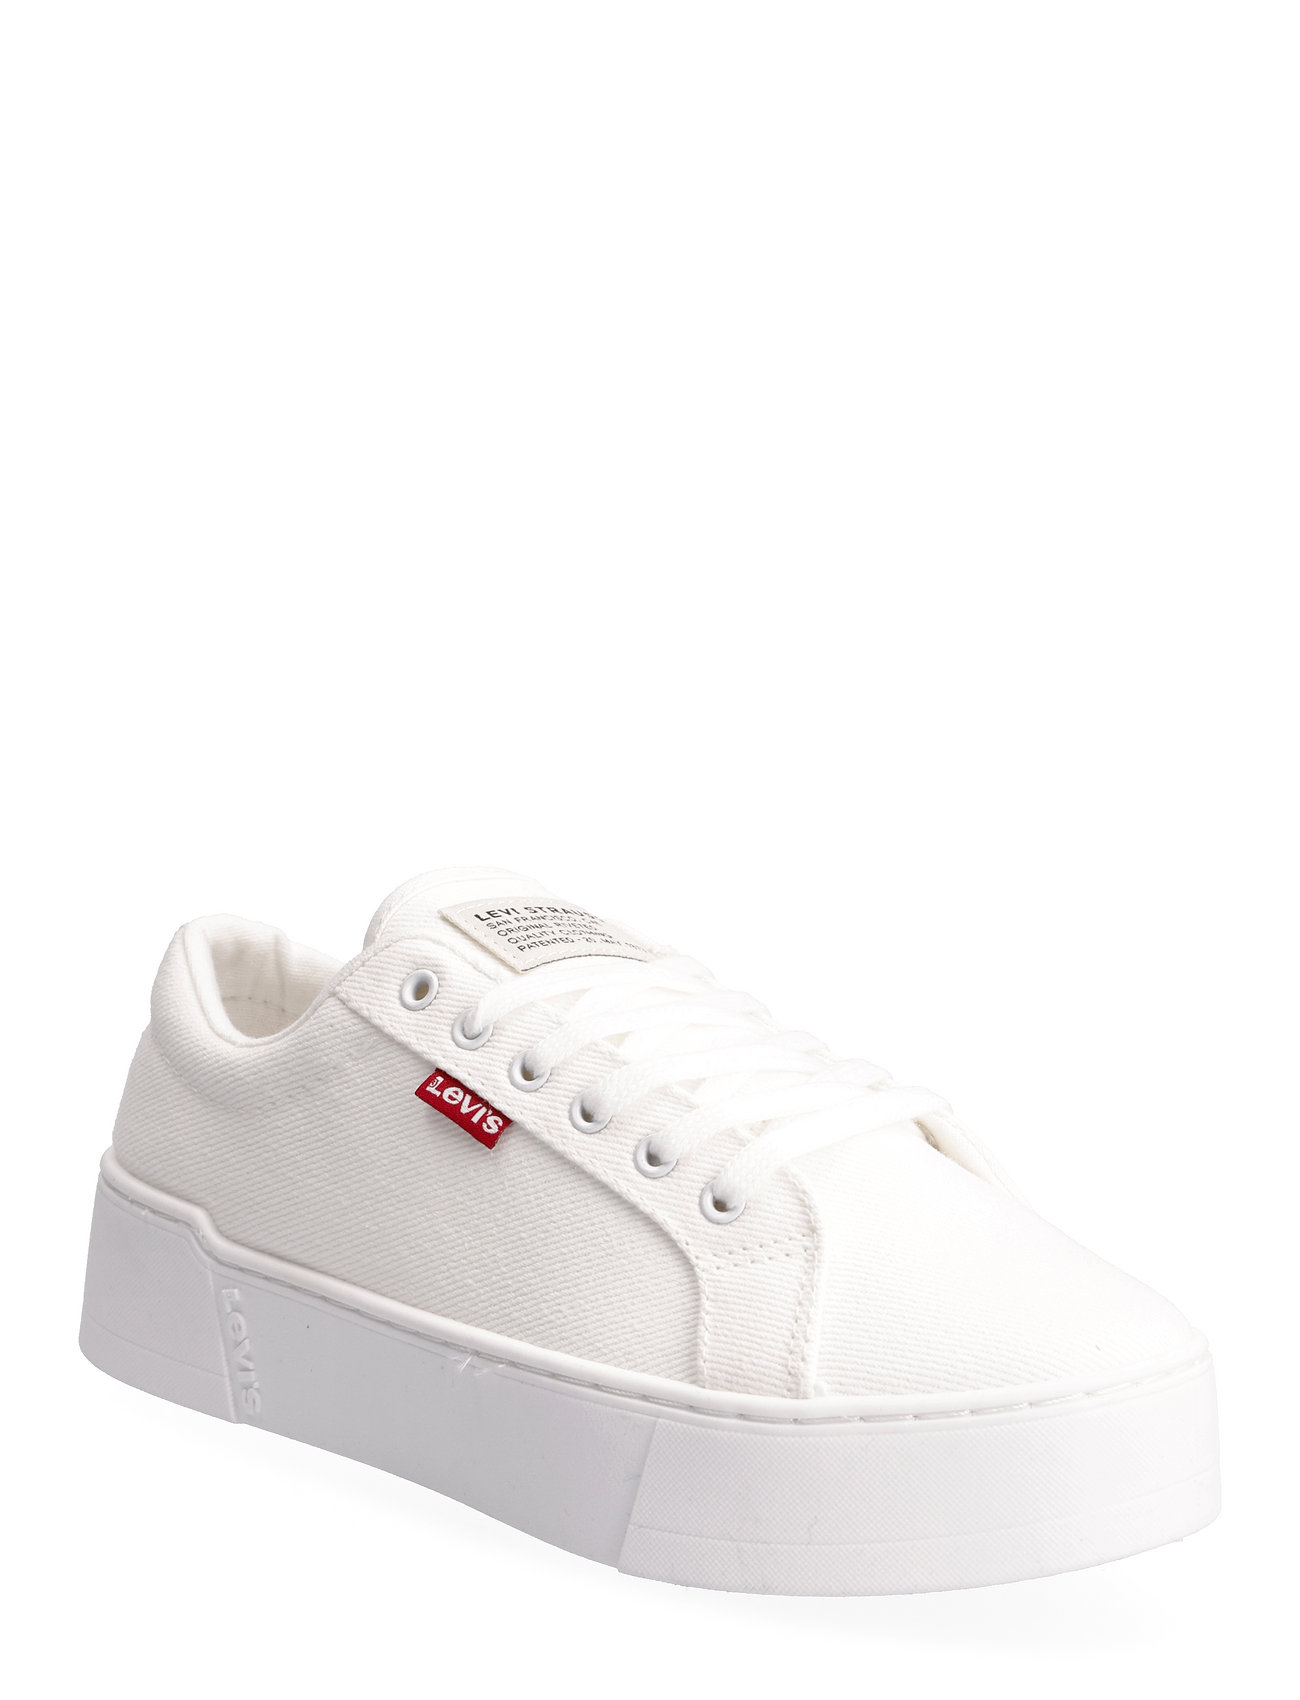 LEVI'S | White Men's Sneakers | YOOX-tuongthan.vn